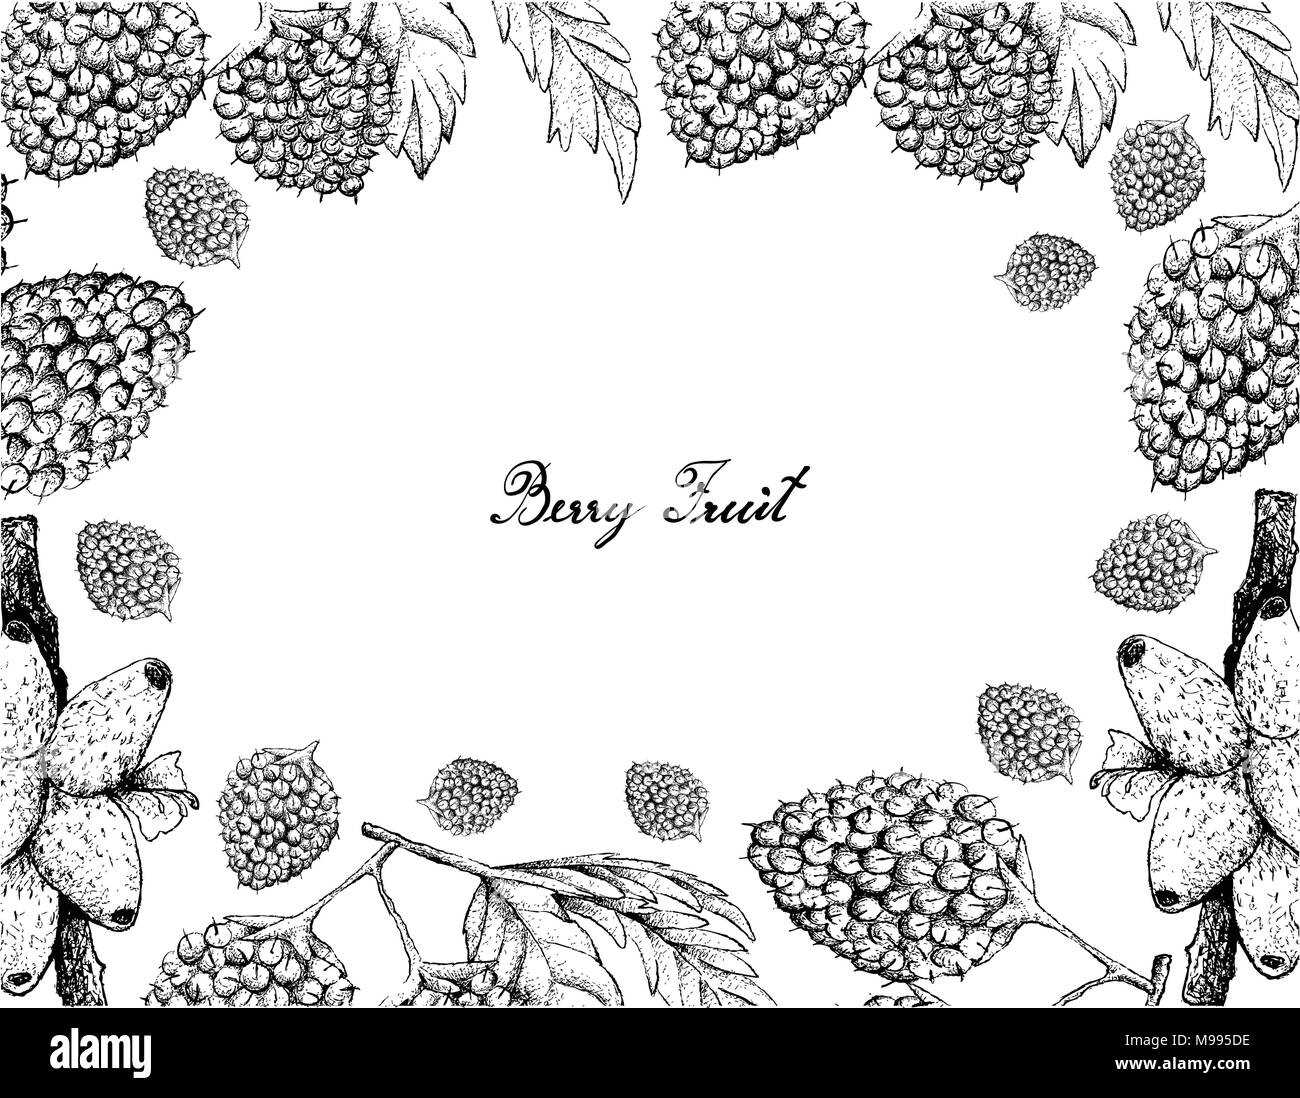 Berry Fruit, Illustration Frame of Hand Drawn Sketch of Medinilla Magnifica or Showy Medinilla and Balloon Berries or Rubus Illecebrosus Fruits Isolat Stock Vector